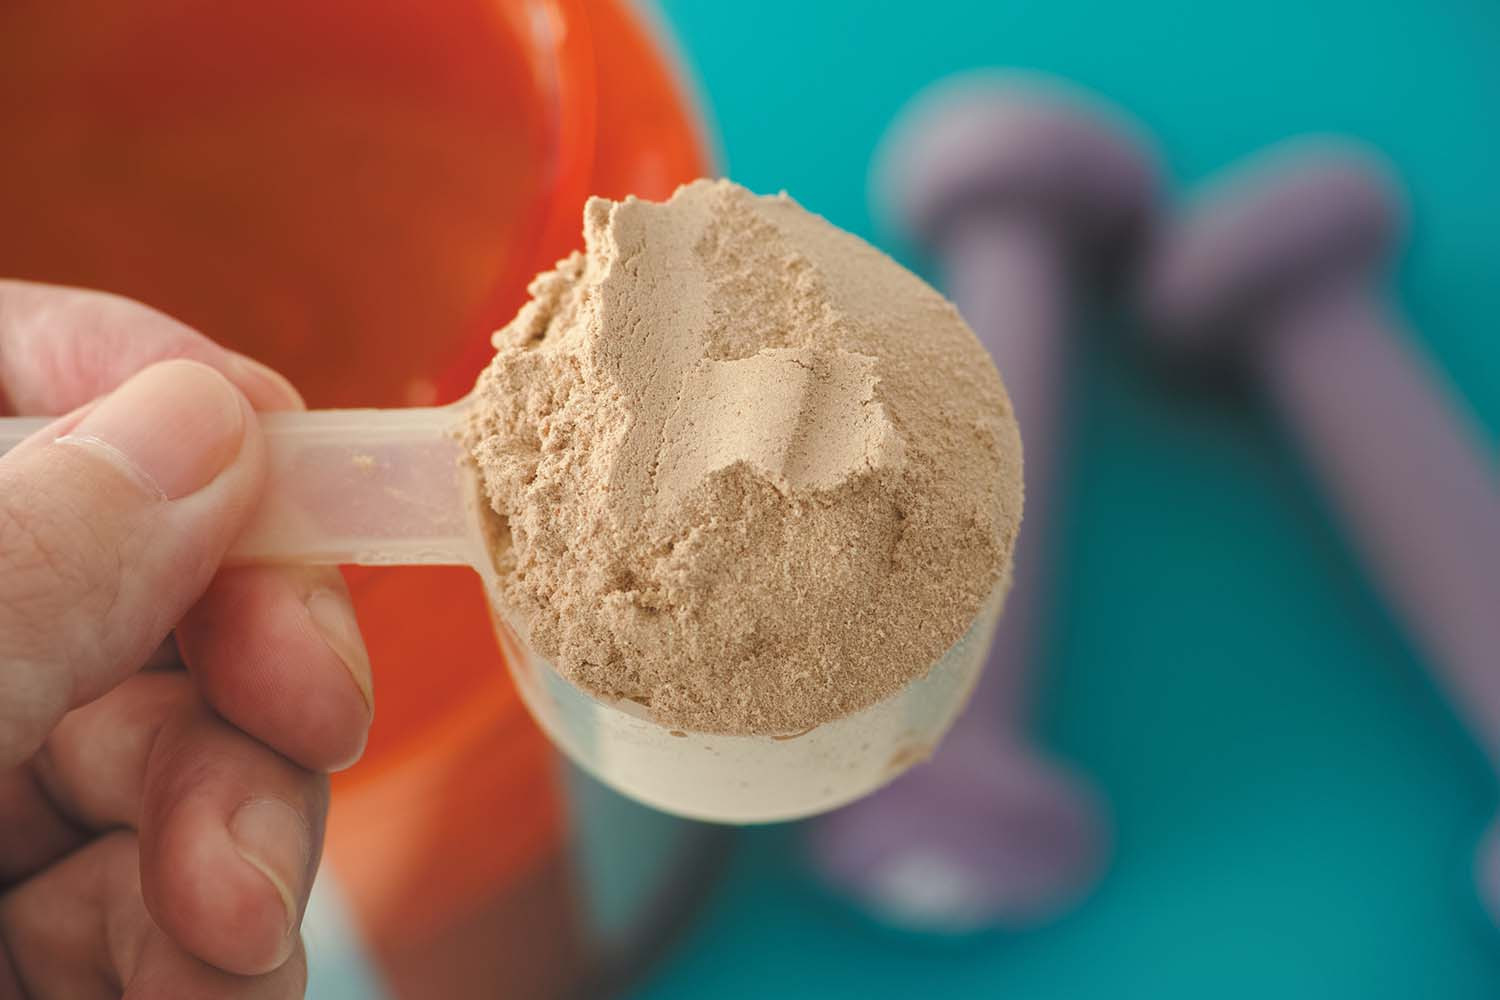 close-up photo of a scoop of protein powder held by a hand